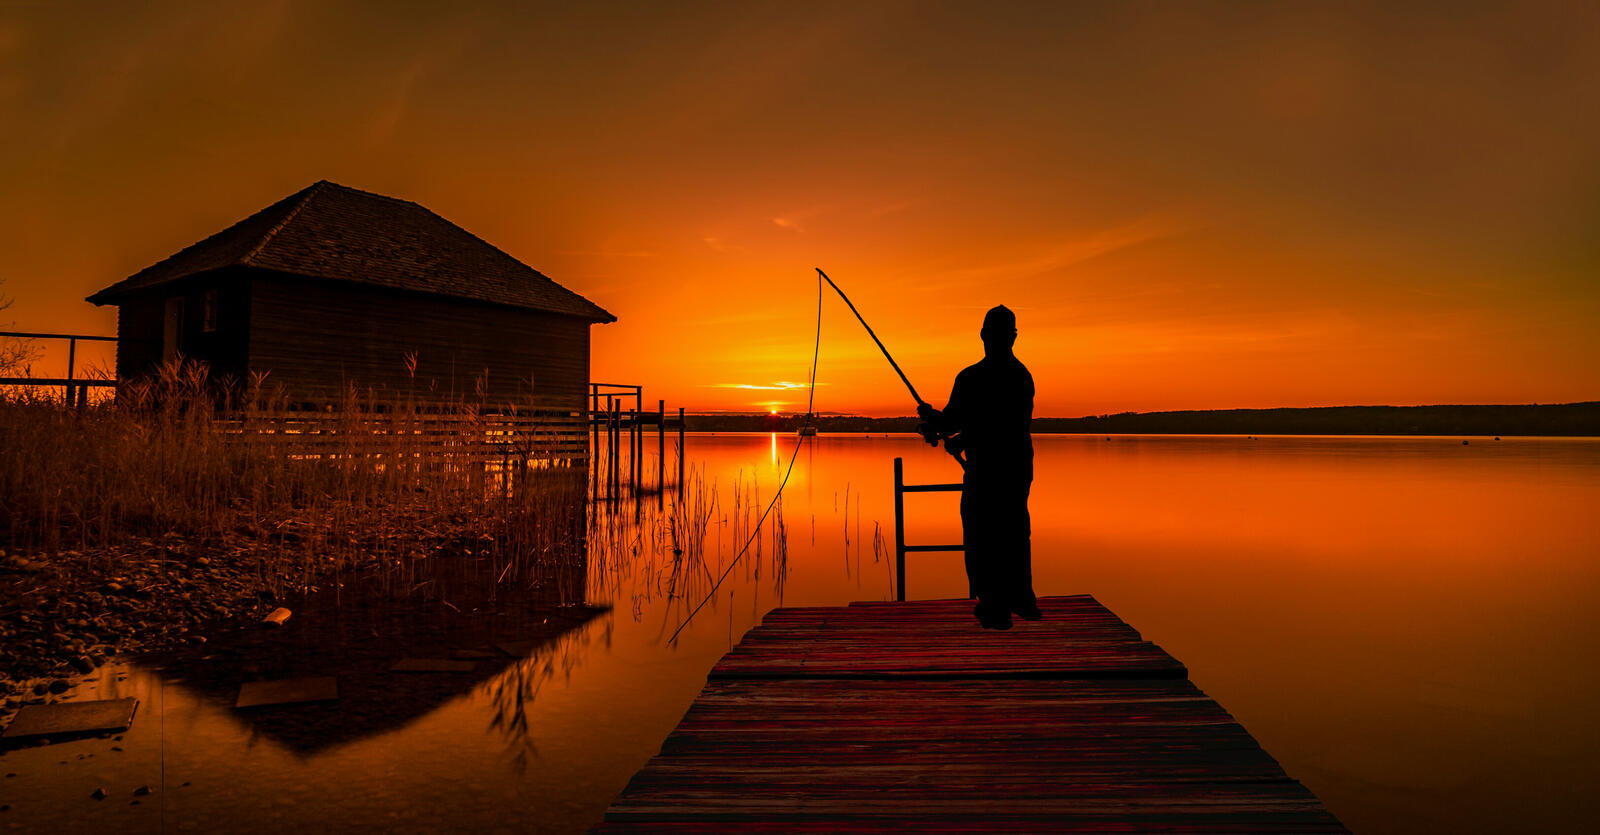 Free photo Silhouette of a fisherman on a wooden bridge next to a wooden house at sunset